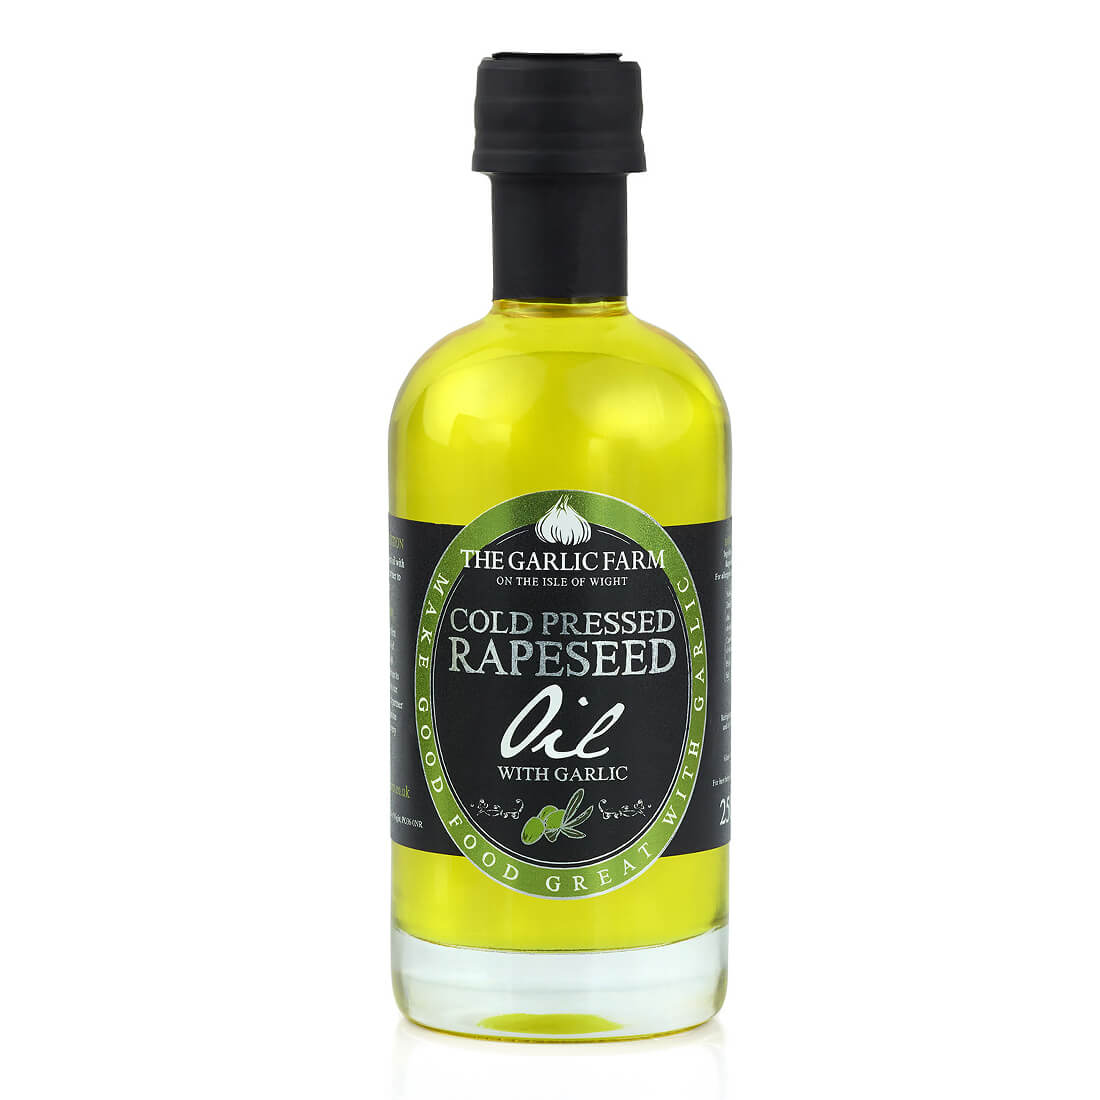 Image of Rapeseed Oil with Garlic by The Garlic Farm, designed, produced or made in the UK. Buying this product supports a UK business, jobs and the local community.